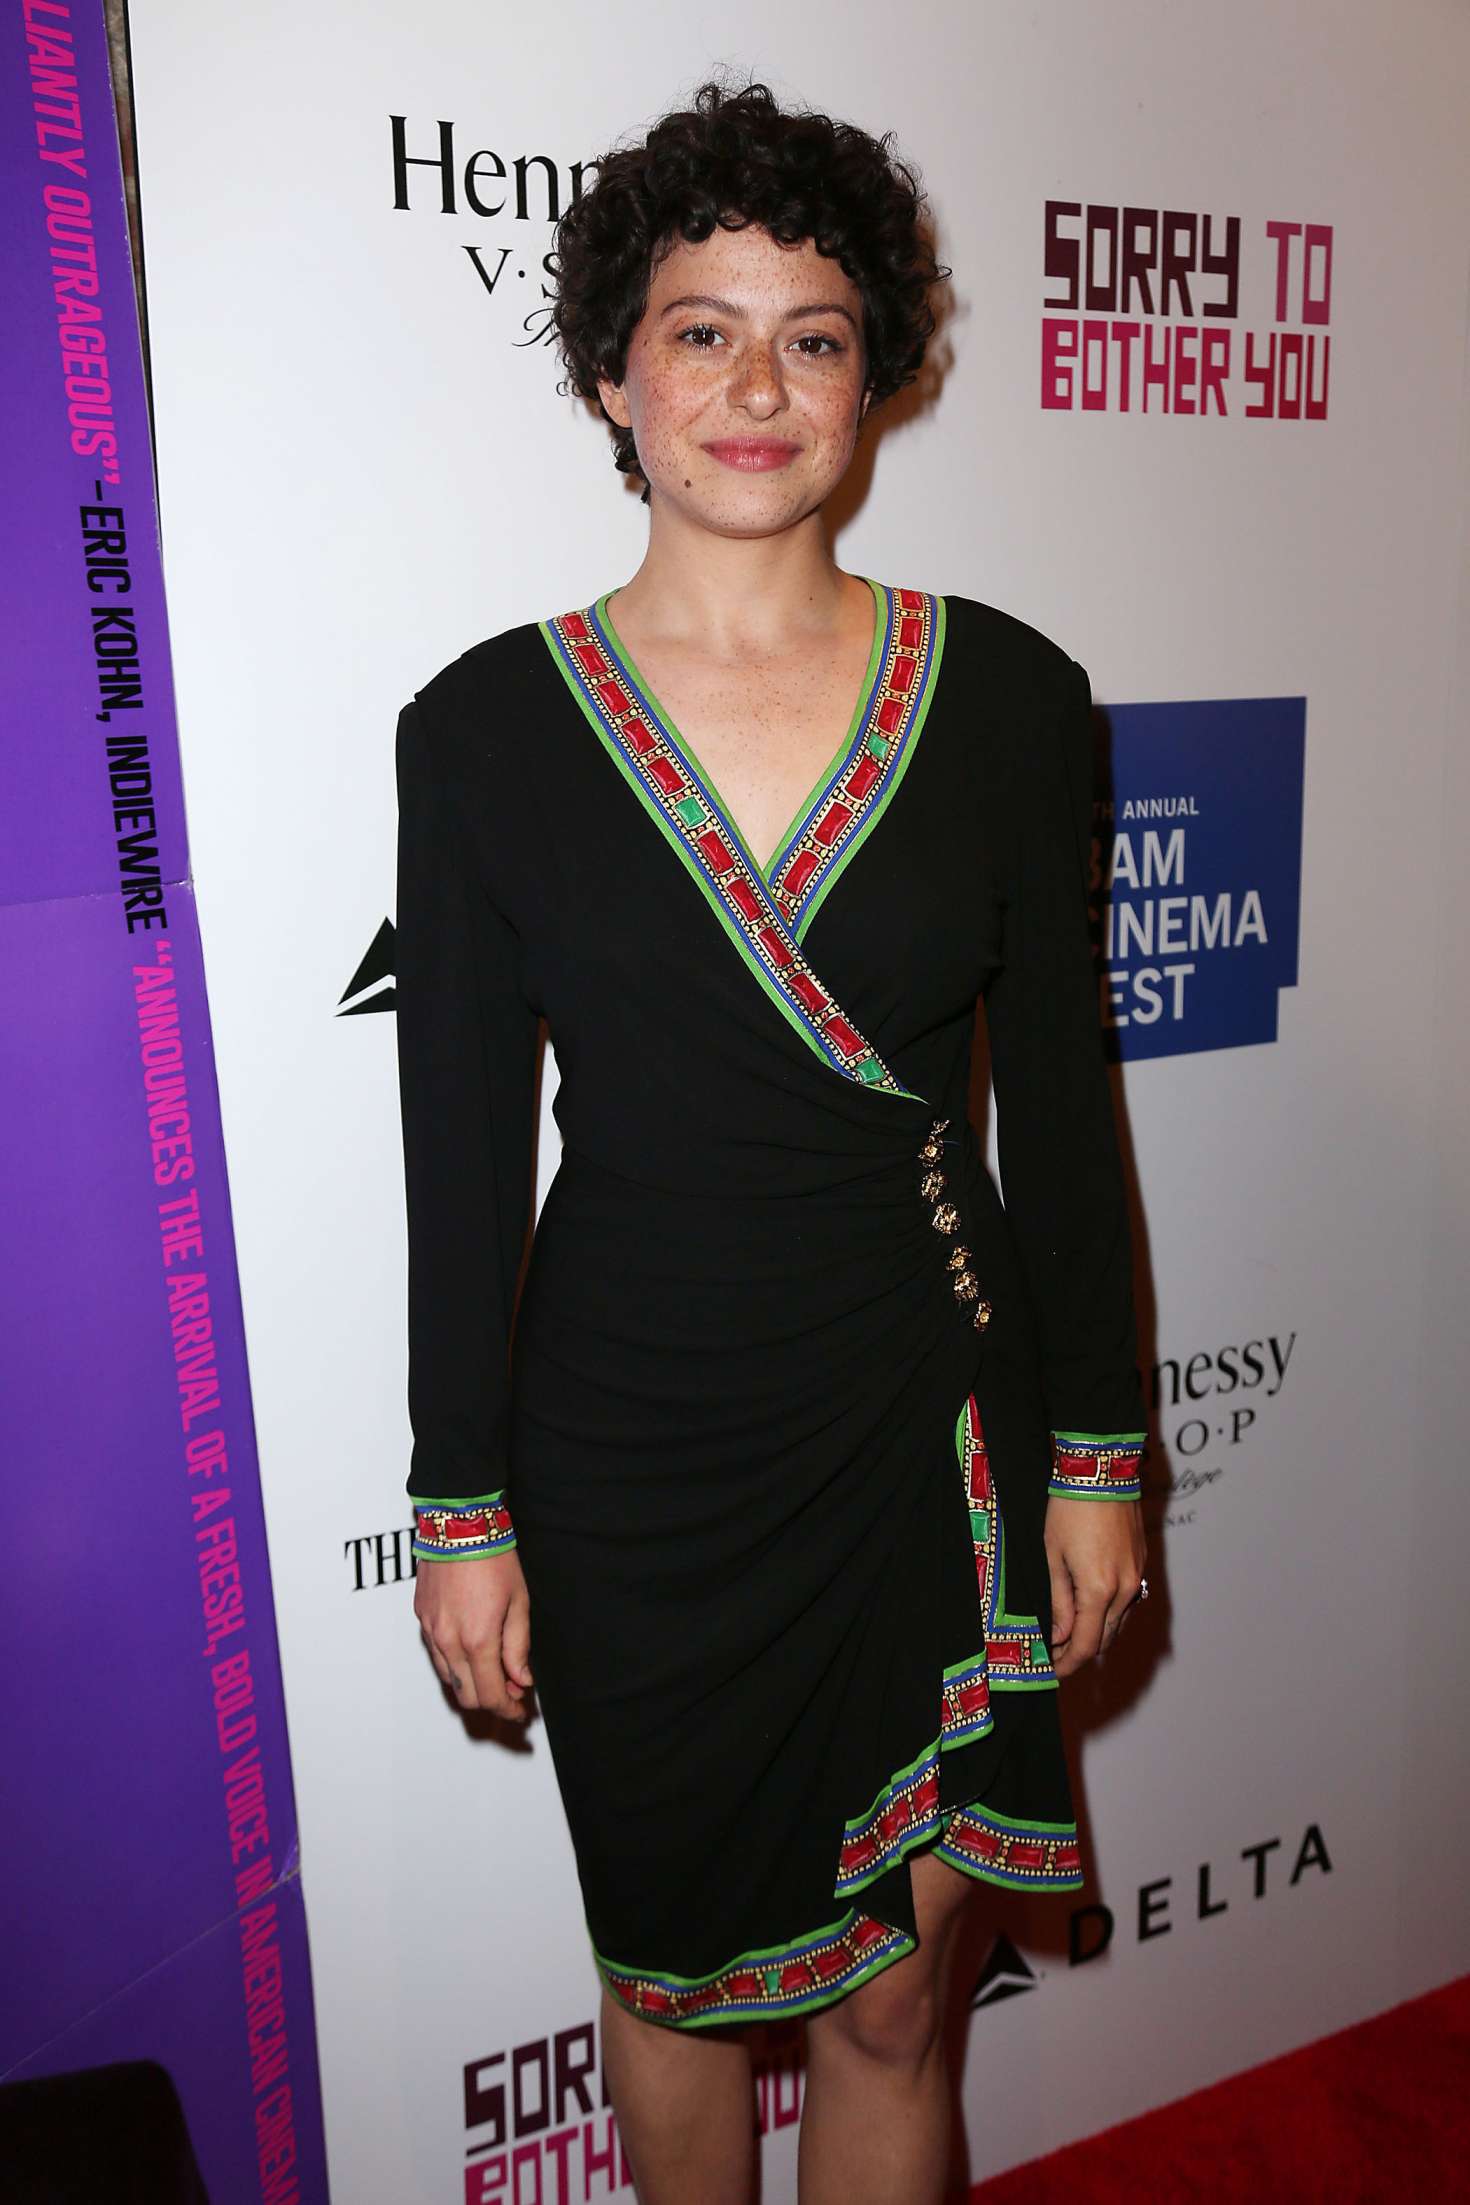 Alia Shawkat - 'Sorry To Bother You' Opening Night Premiere in NY